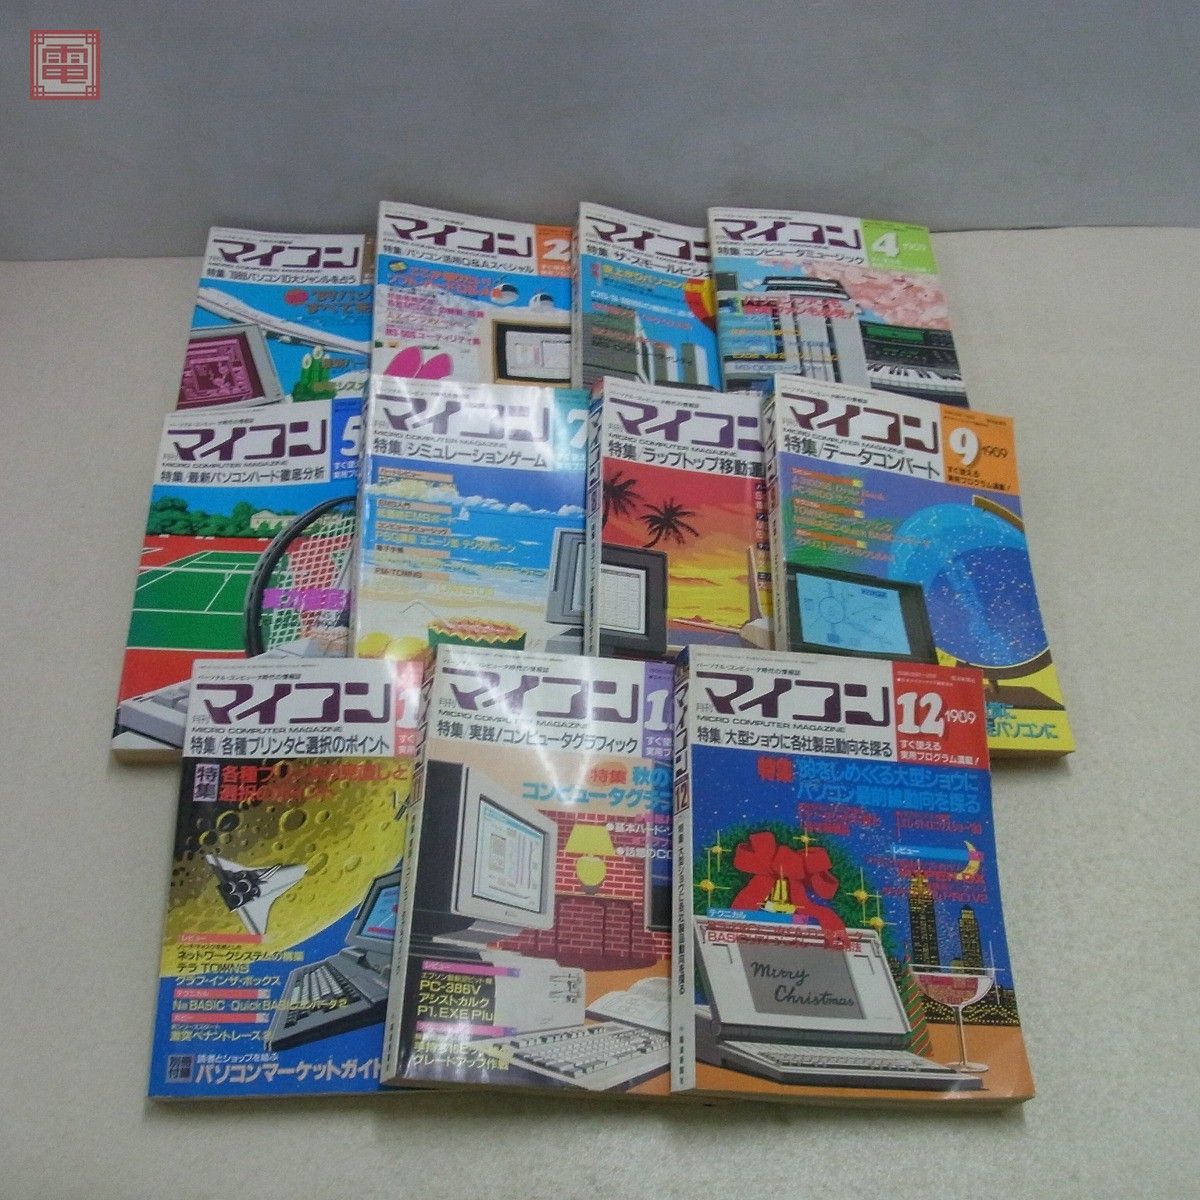  magazine monthly microcomputer 1989 year 11 pcs. set don't fit radio wave newspaper company [20